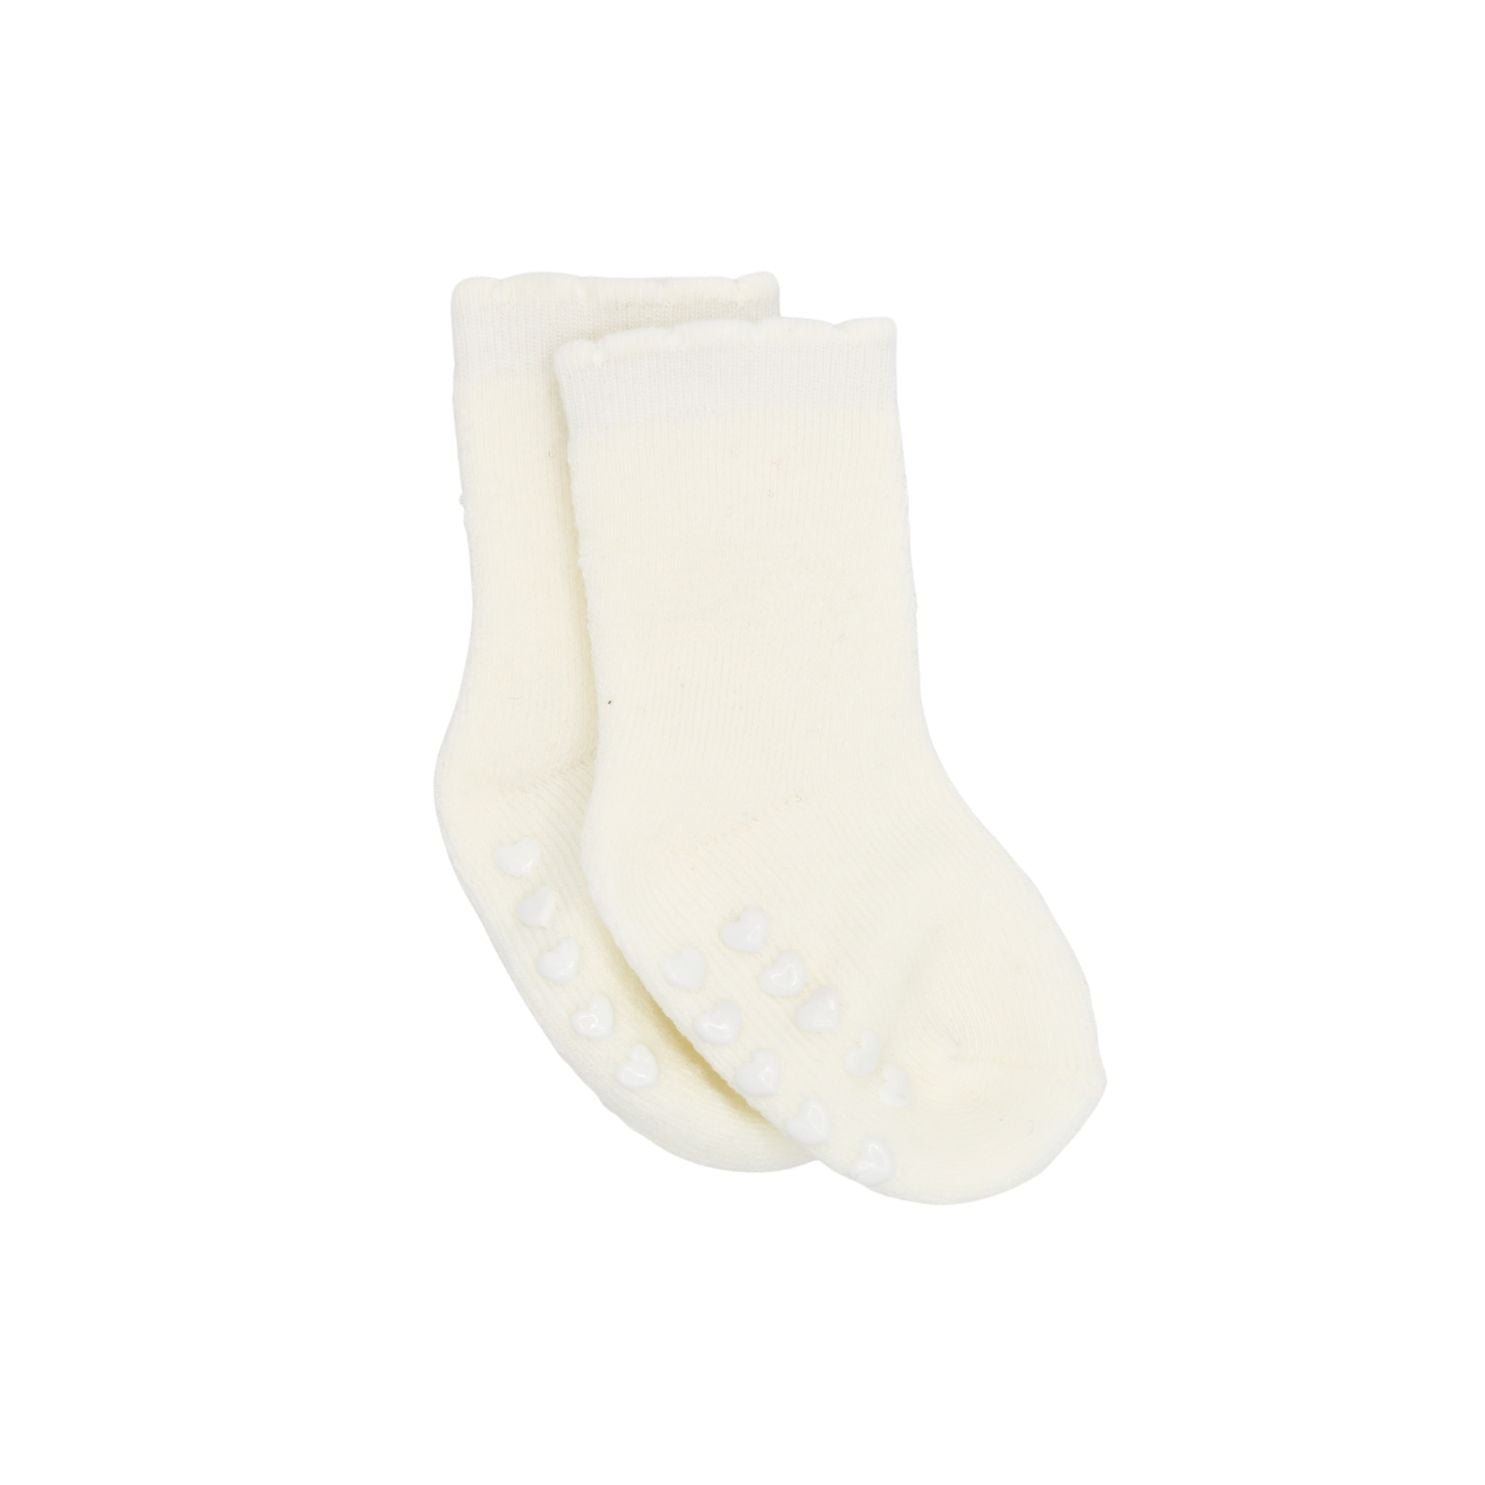 The Baby Cubby Scalloped Heart Grip Socks - White